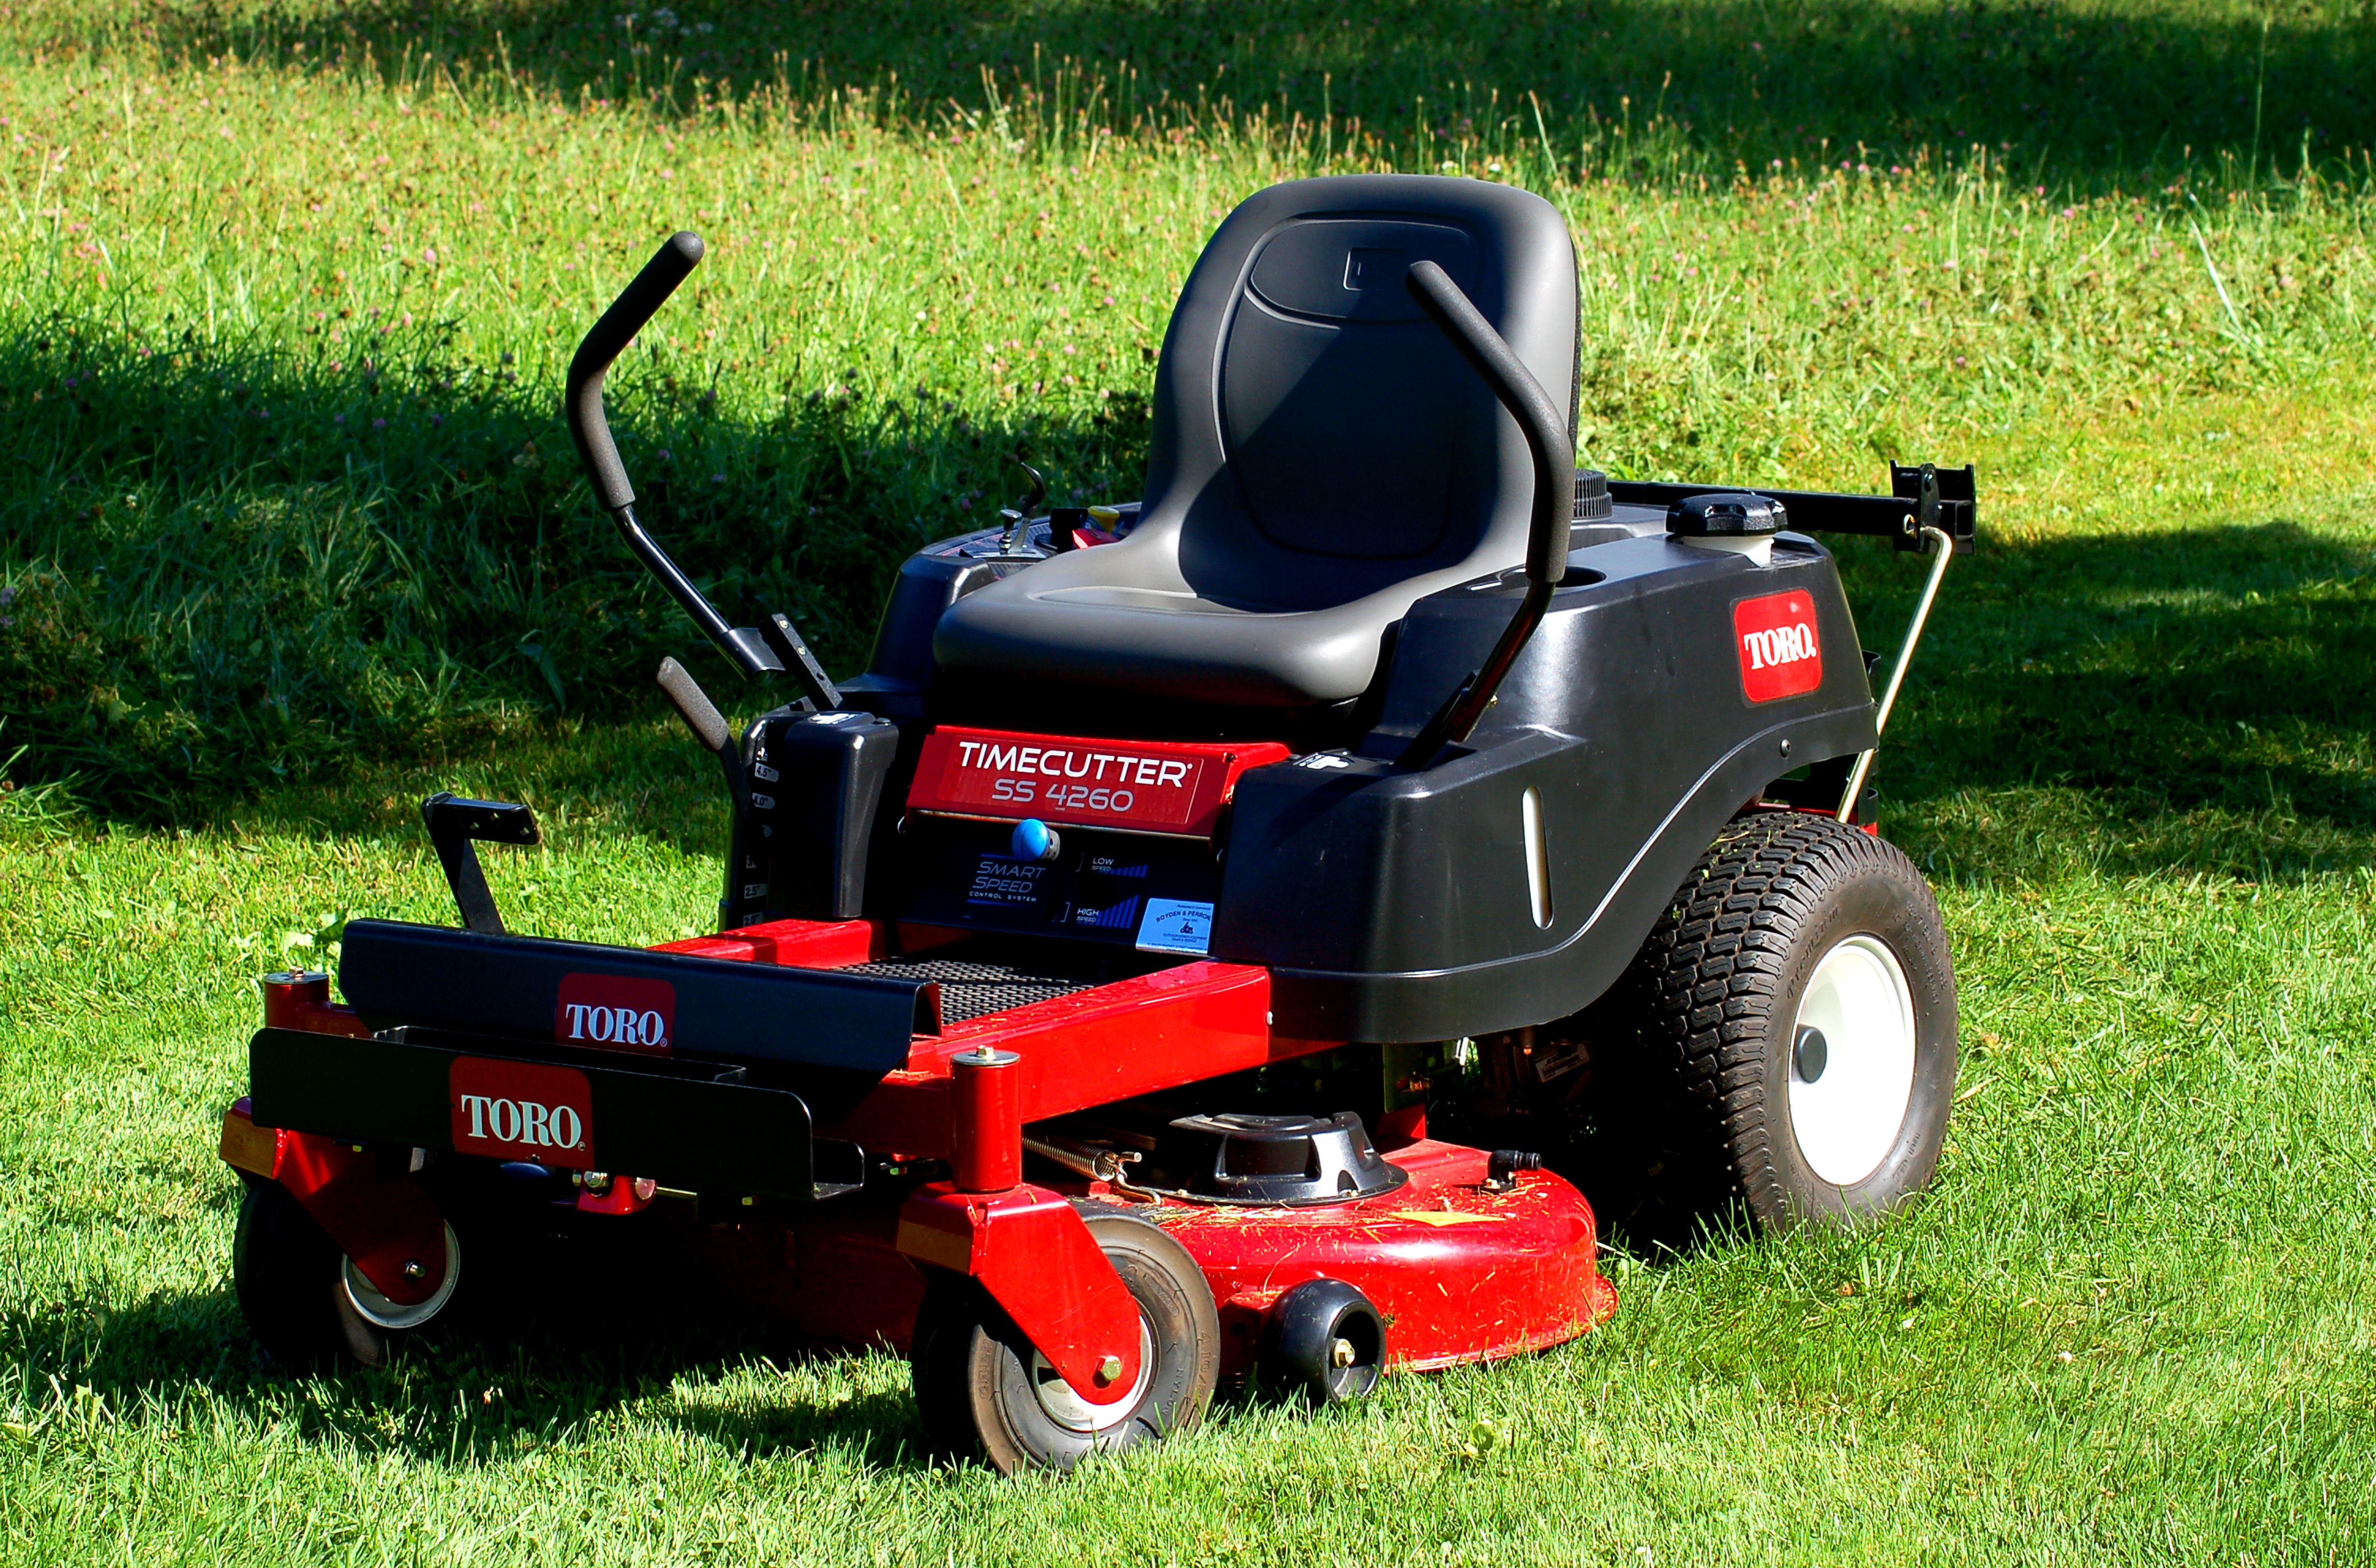 Riding Mowers vs. Lawn Tractors: What's the Difference